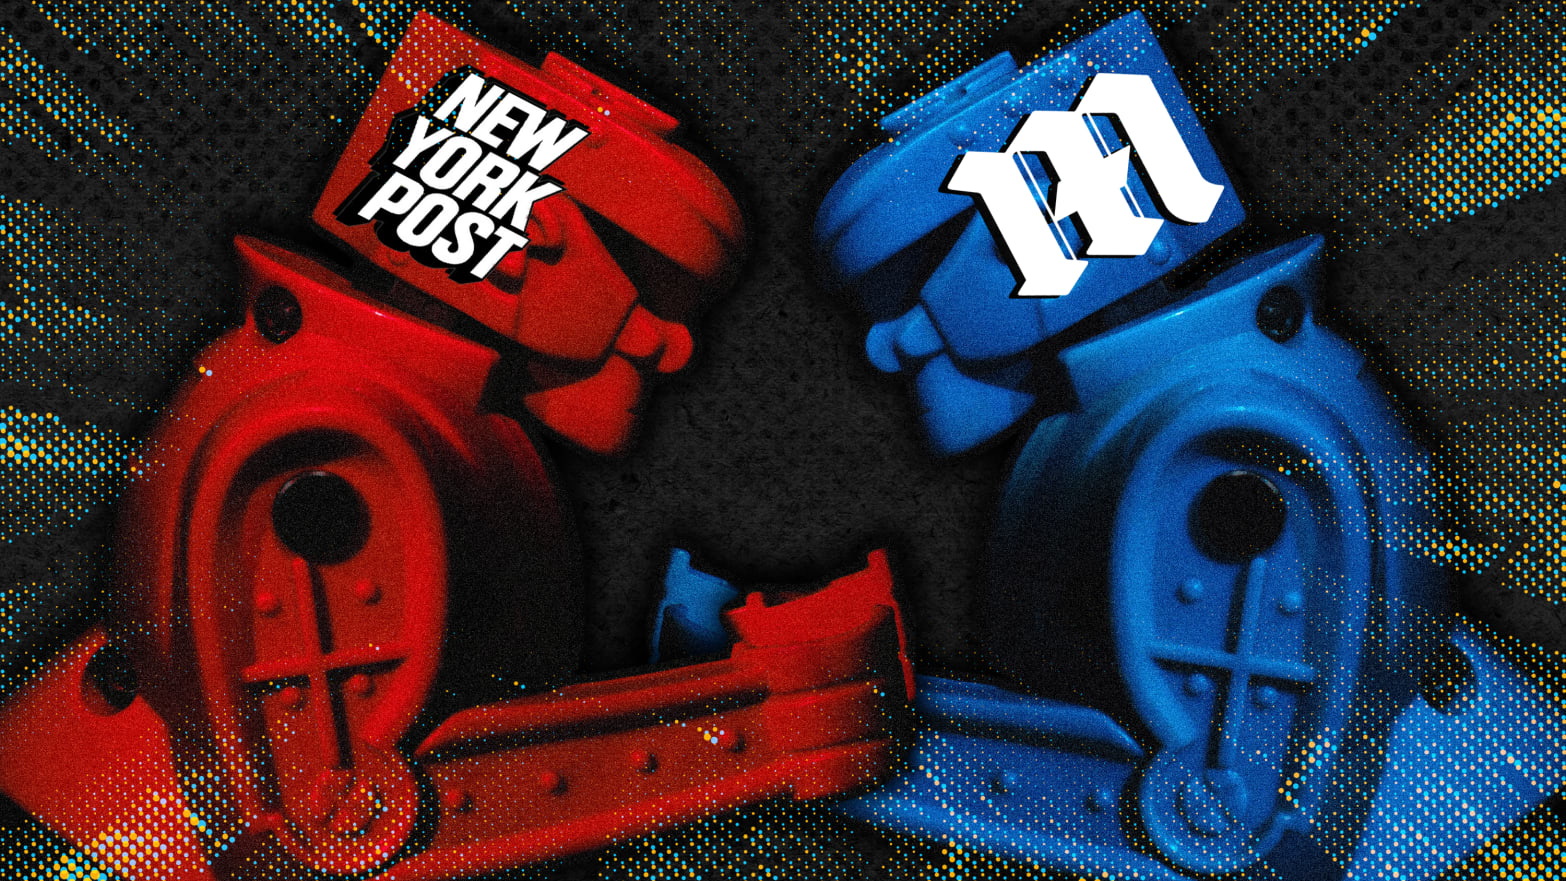 A photo illustration of red and blue boxing robots with the New York Post and Daily Mail logos.